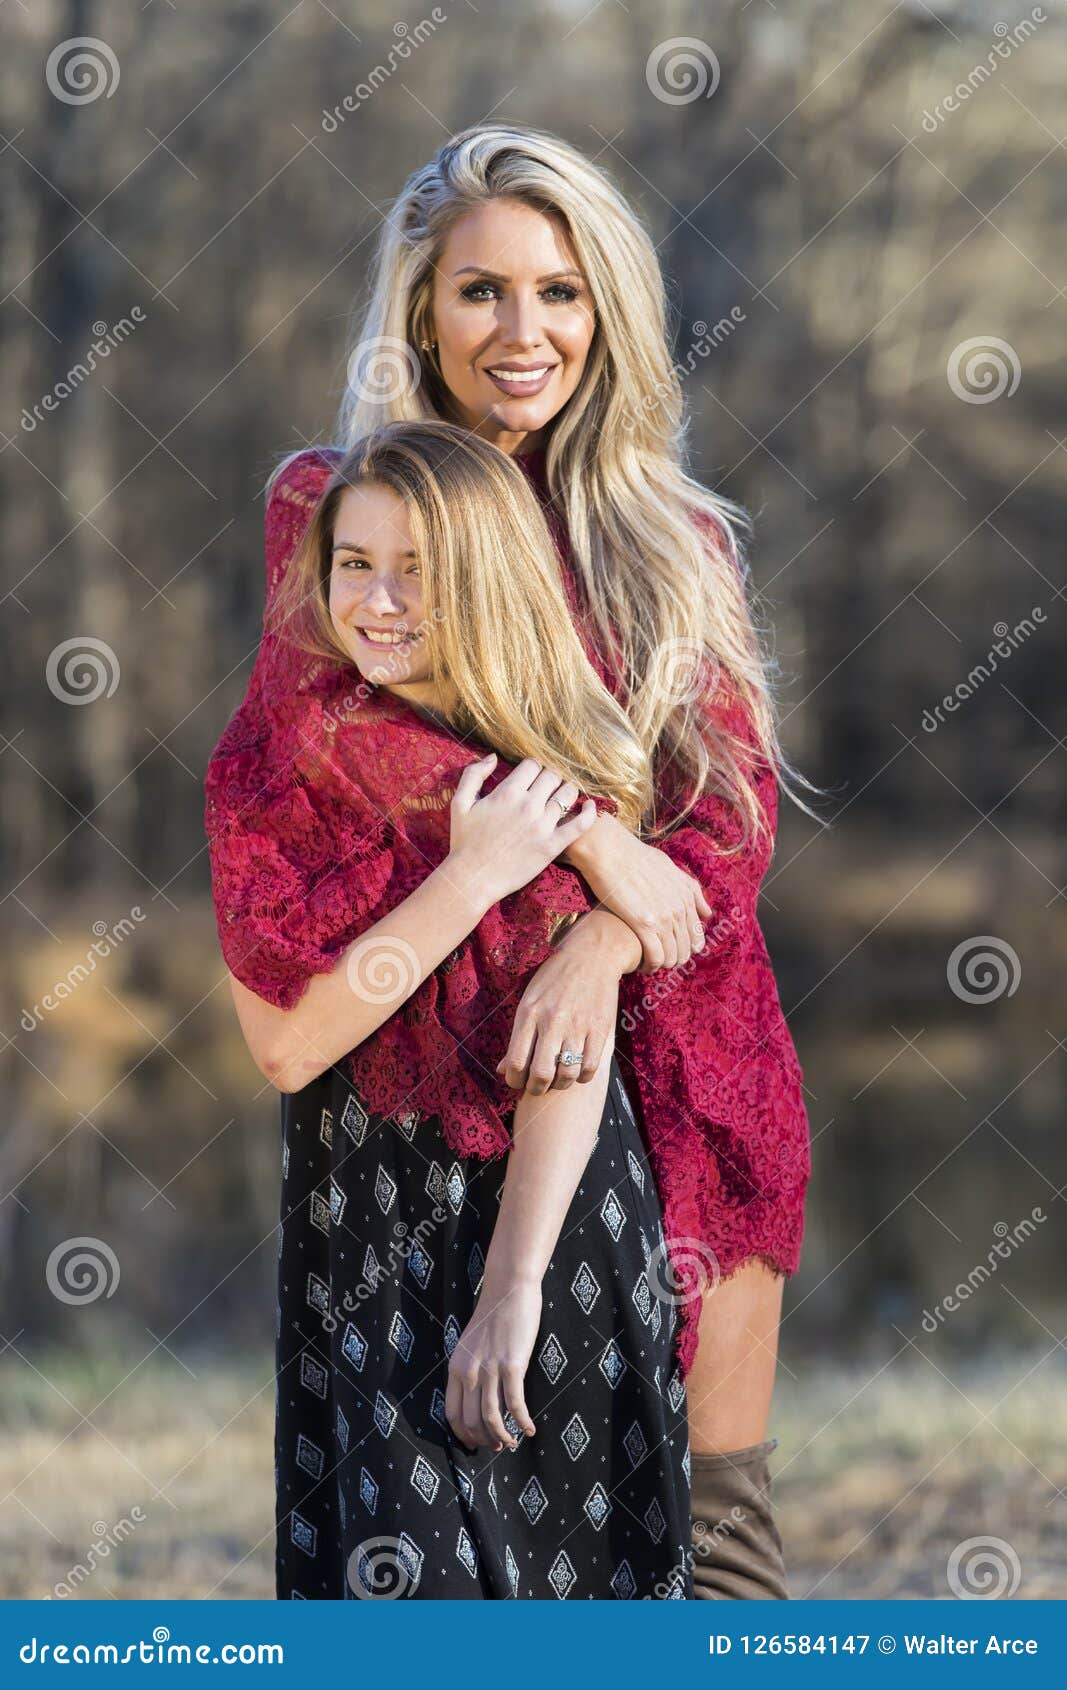 Gorgeous Blonde Model Posing With Her Teenage Daughter 